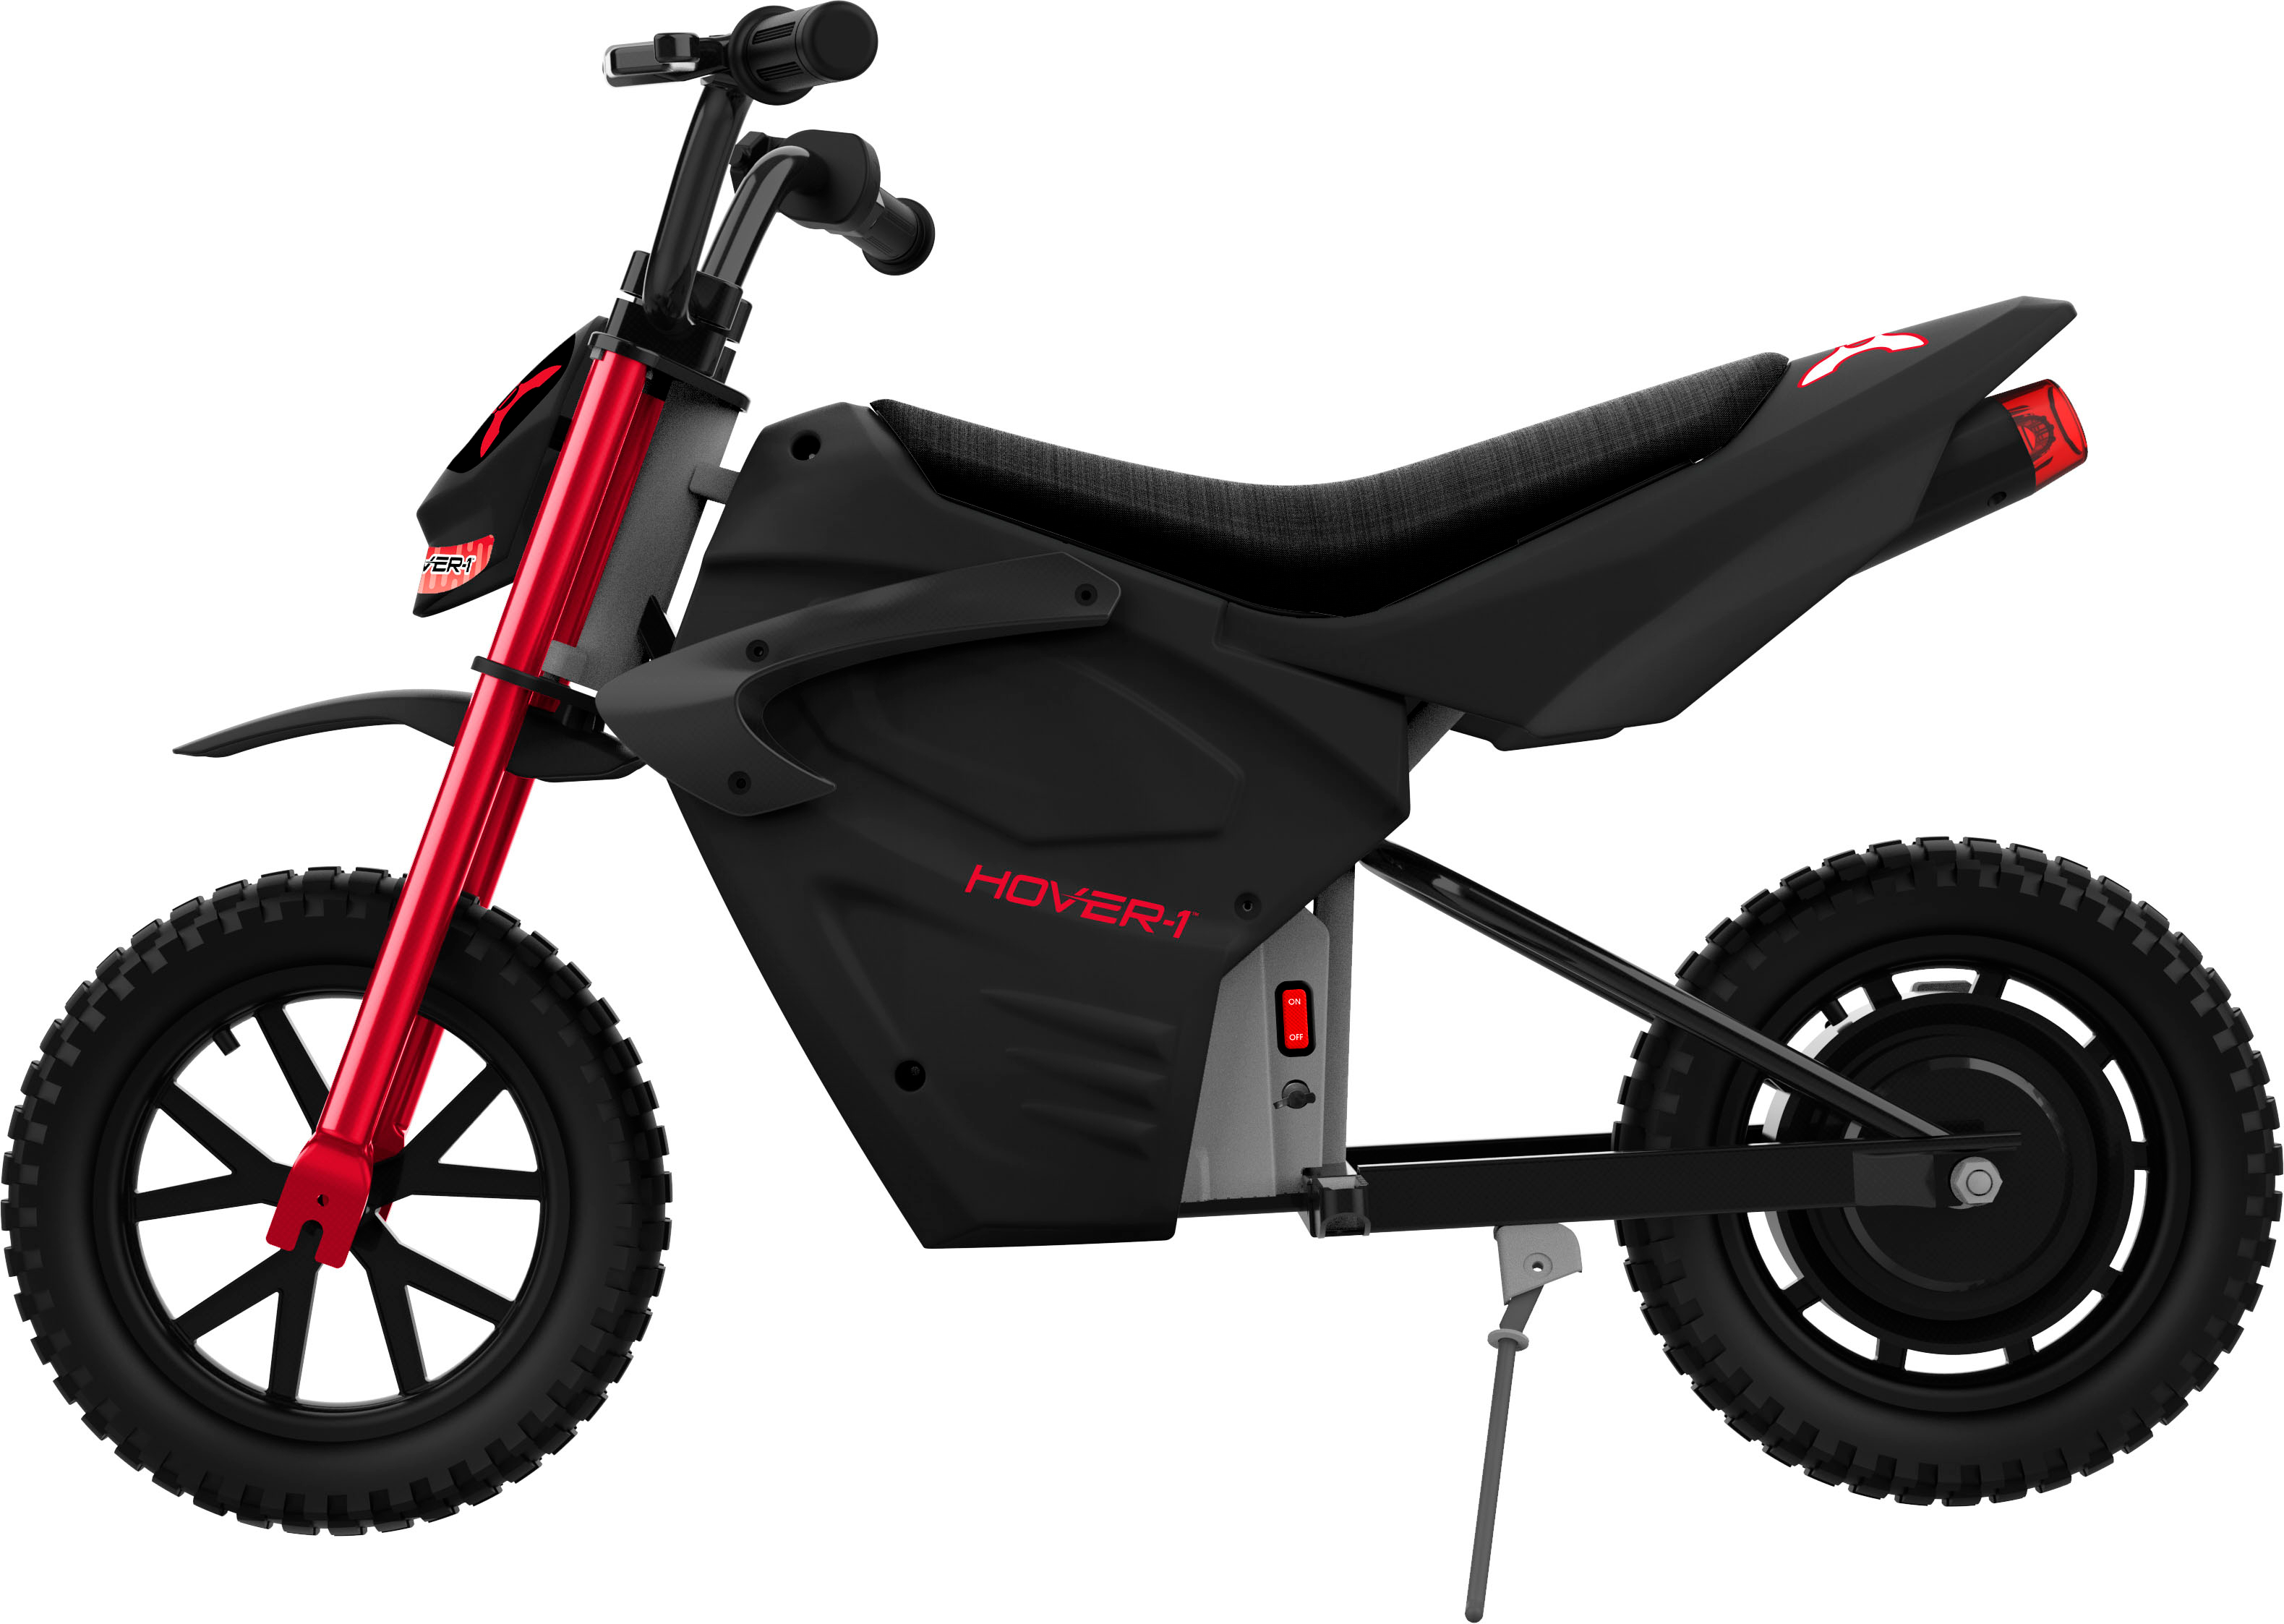 Angle View: Hover-1 - Trak Electric Dirt Bike for Kids, Silent-chainless motor, Lithium-ion Battery, 9 mi Range, 9 mph Max Speed - Red